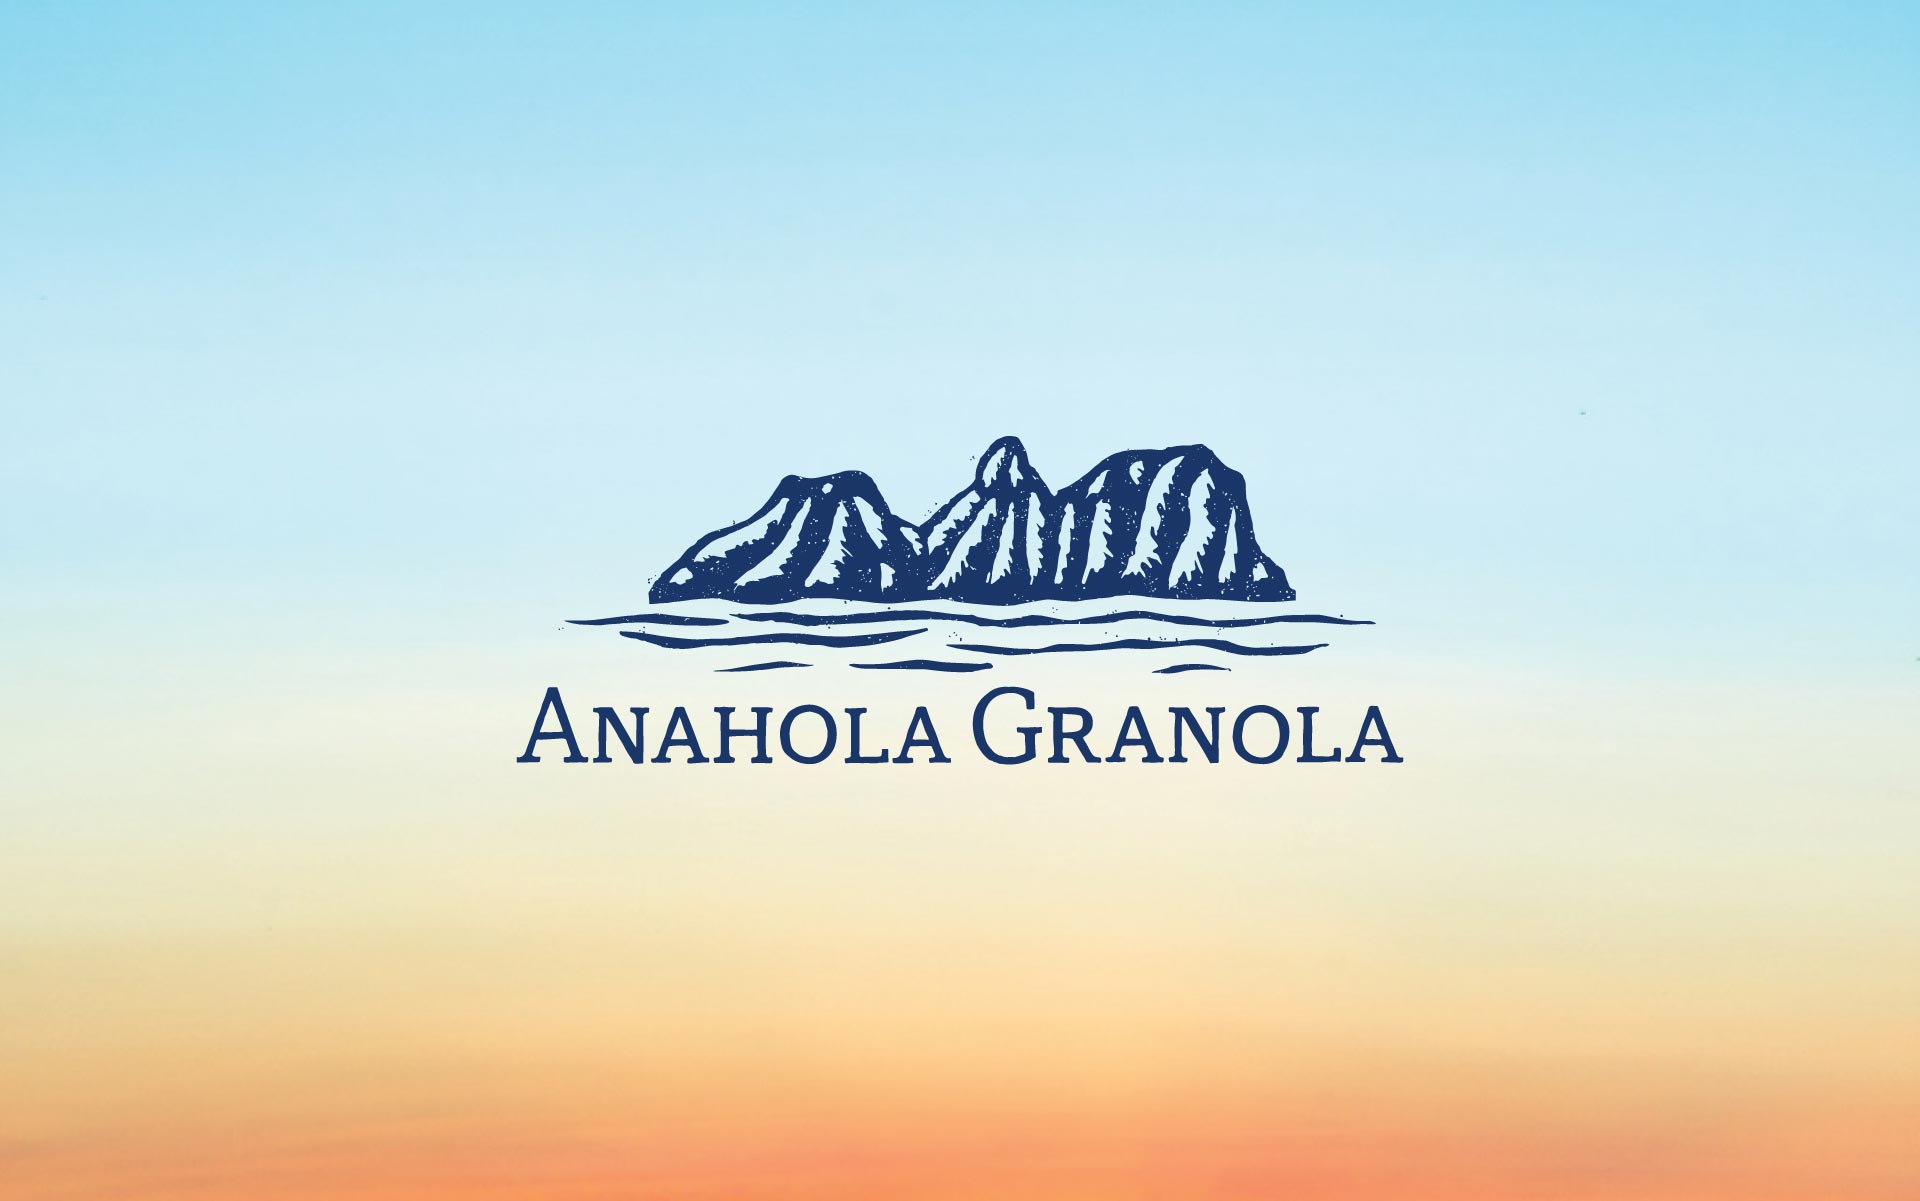 Anahola Granola product package designed by Creative Retail Packaging with detailed branding and identity